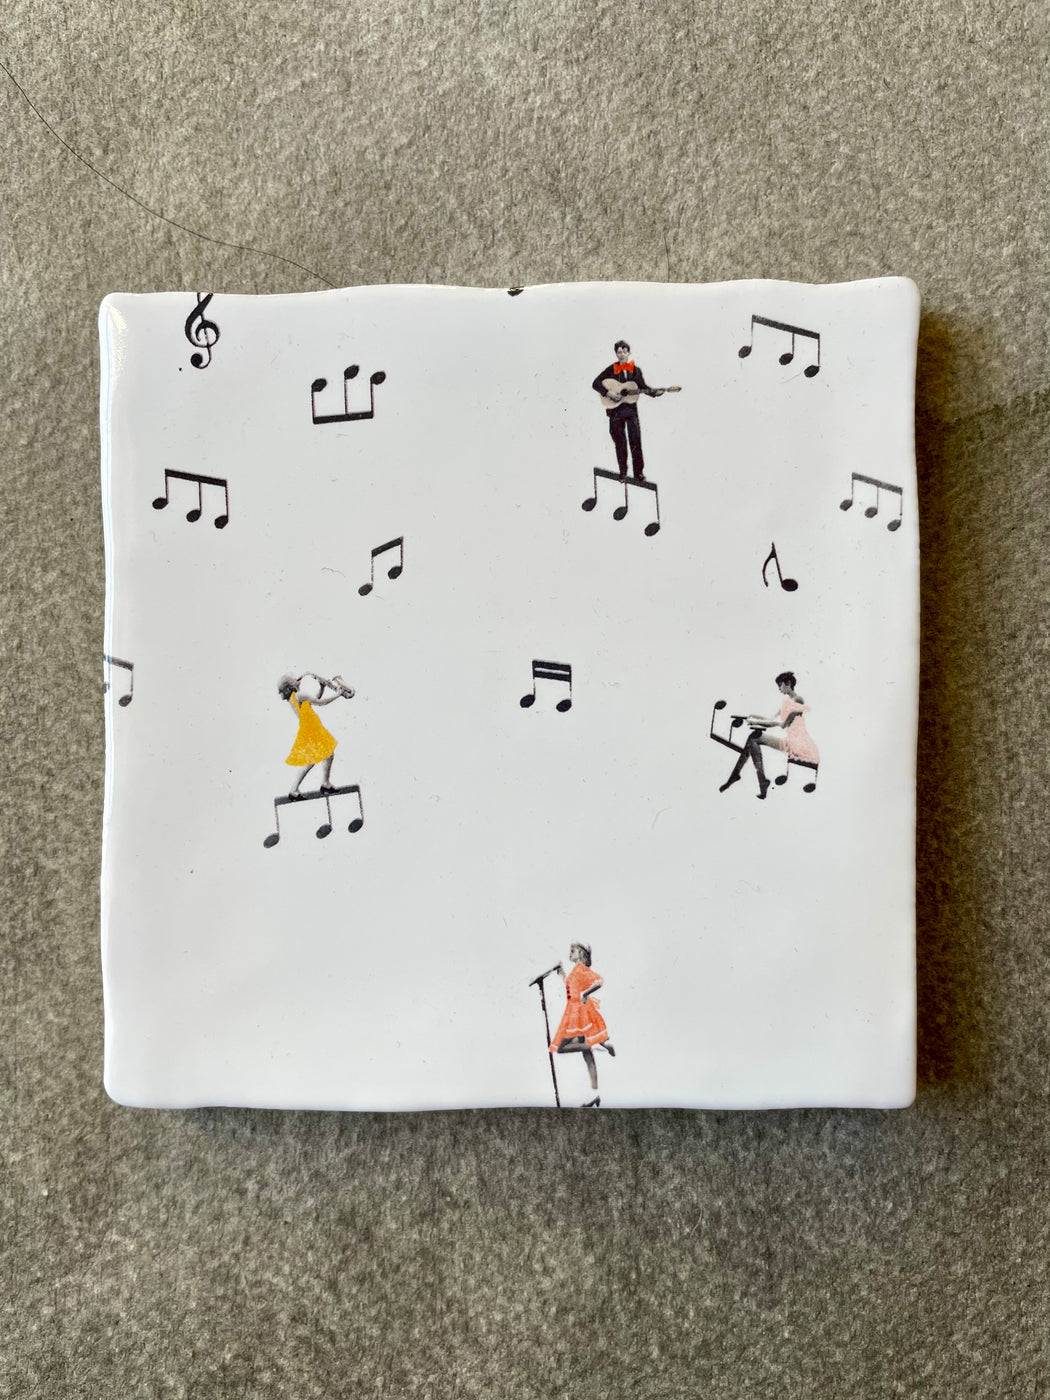 "There's Music in the Air" Story Tile by Marga Van Oers